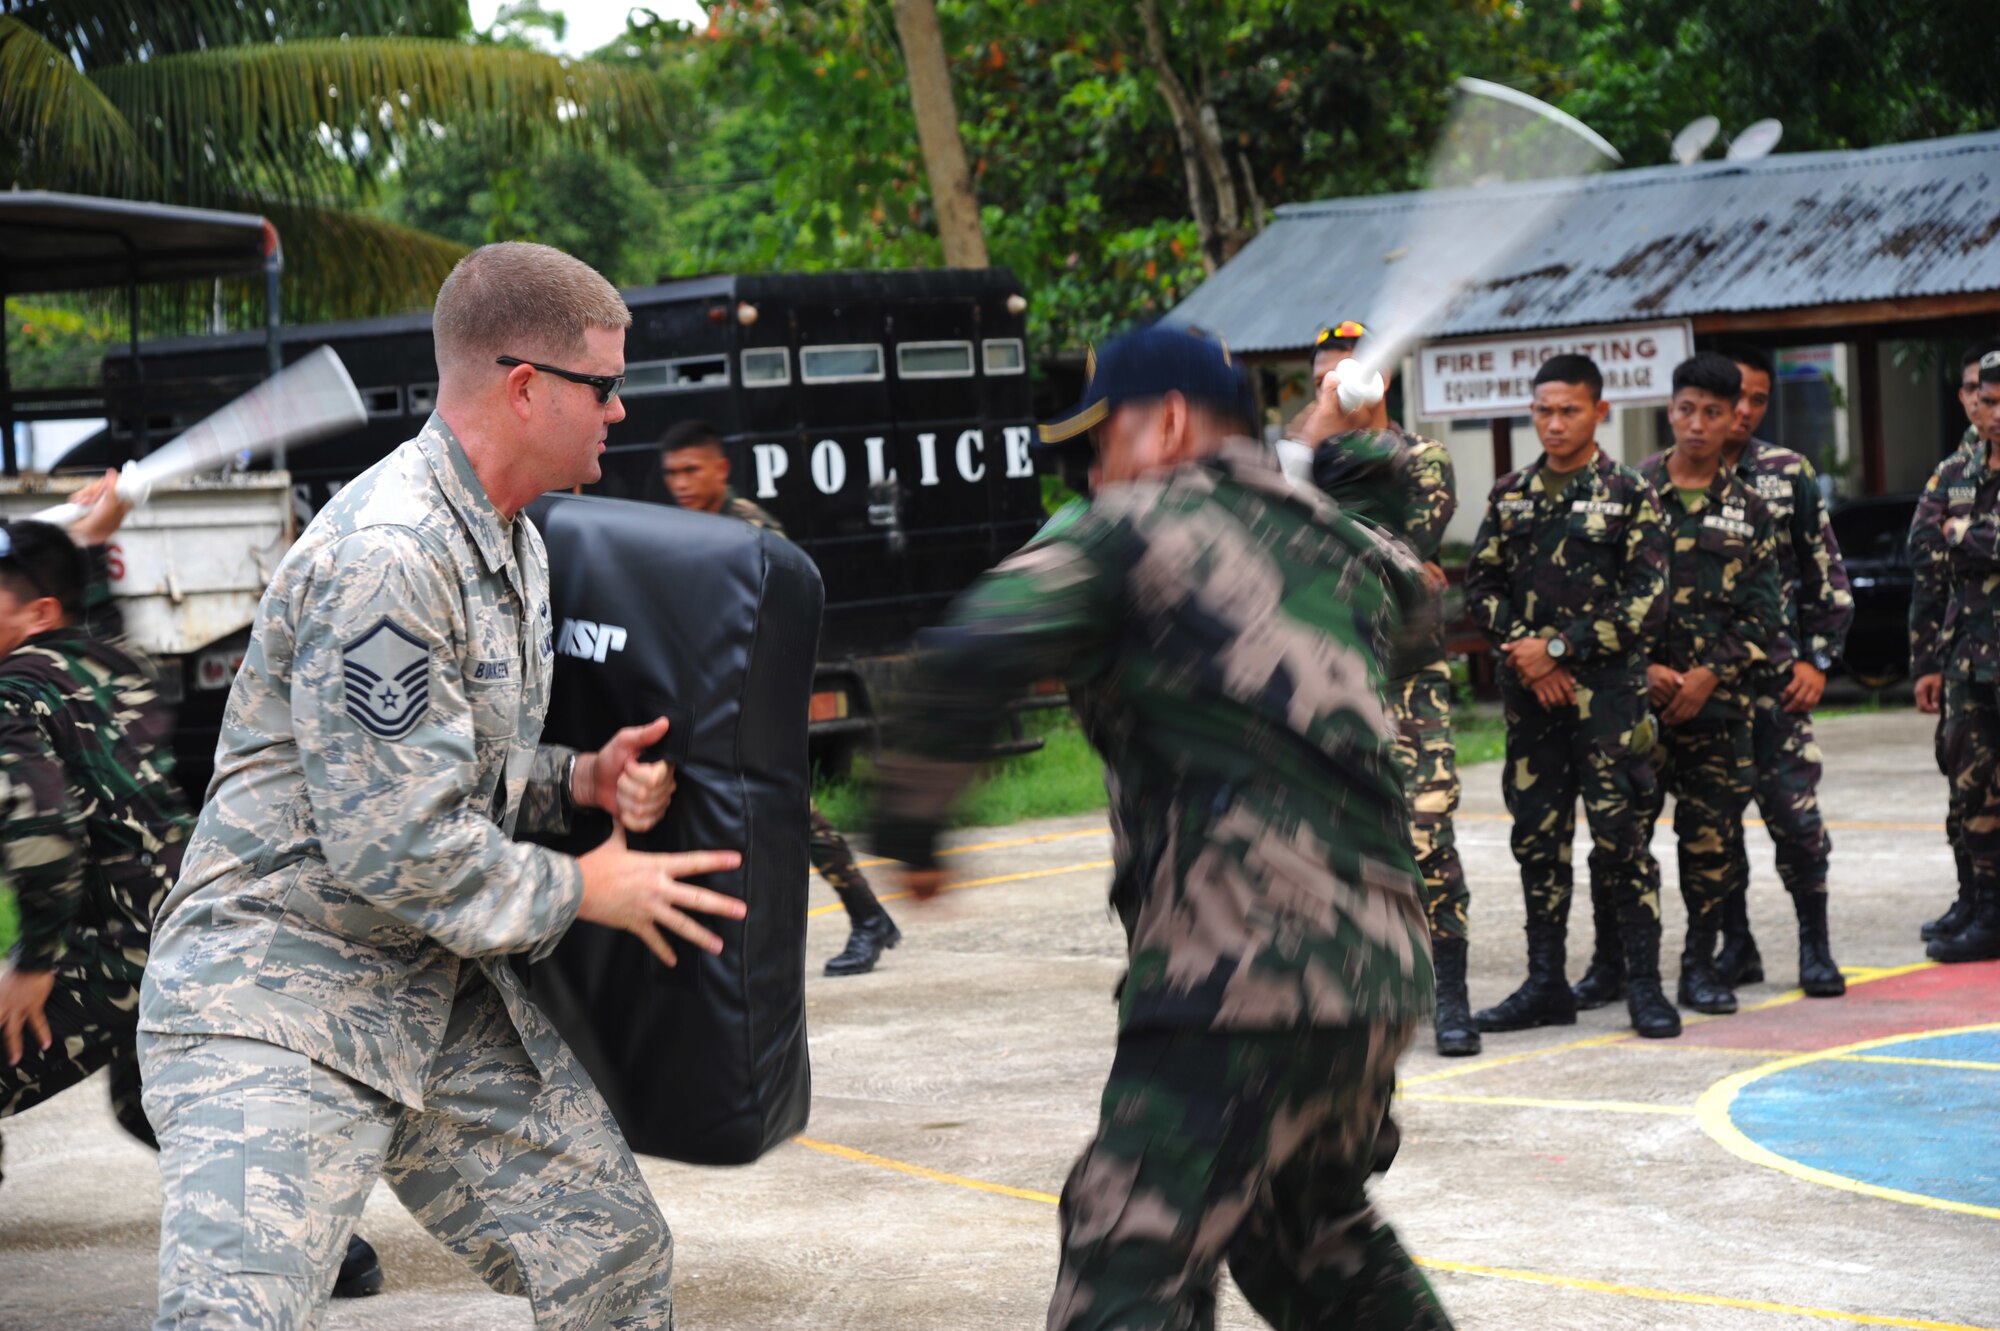 U.S. Air Force Master Sgt. Jeremy Burkeen, from 736th Security Forces Squadron at Andersen Air Force Base, Guam, facilitates non-lethal crowd control training with members of the Philippine national police and Armed Forces of the Philippines during Pacific Angel in Tagbiliran City, Philippines, Aug. 16, 2015. Efforts undertaken during Pacific Angel help multilateral militaries in the Pacific improve and build relationships across a wide spectrum of civic operations, which bolsters each nation’s capacity to respond and support future humanitarian assistance and disaster relief operations. (U.S. Air Force photo by Tech. Sgt. Aaron Oelrich/Released)